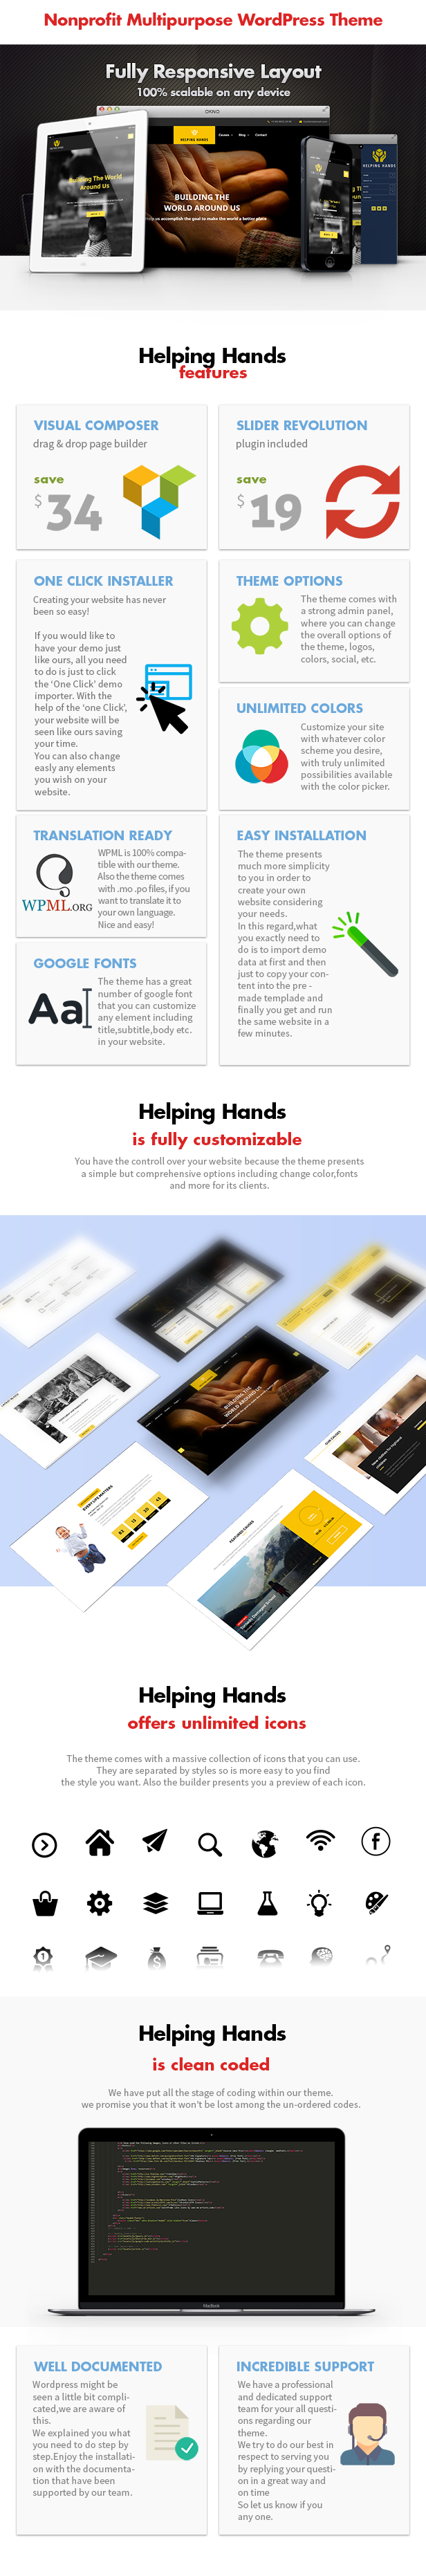 Helping Hands - Crowdfunding Charity Theme - 6